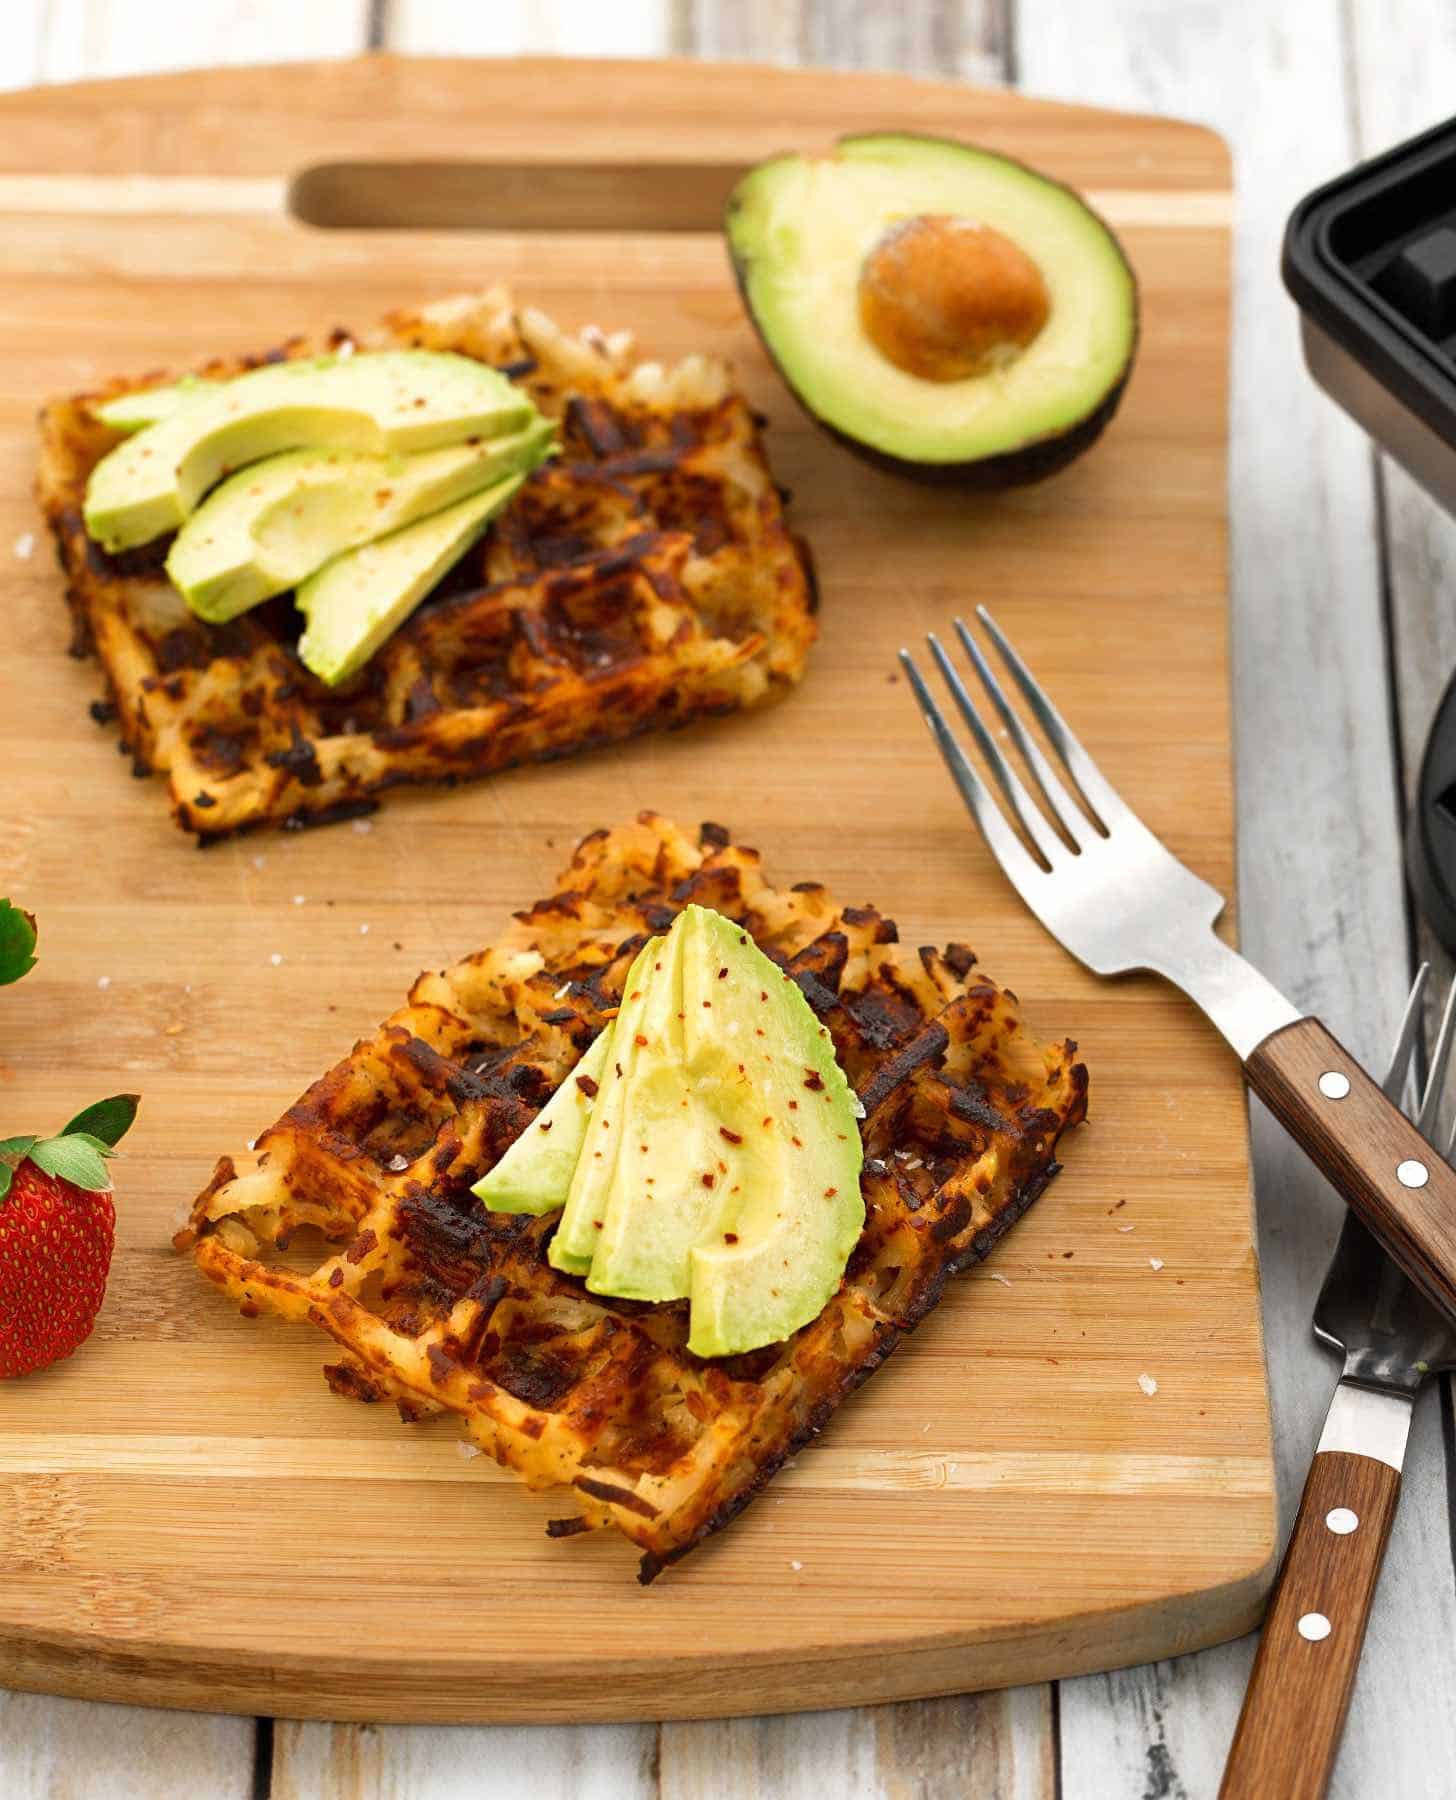 Best Vegan Hashbrowns Made Waffle Style With Avocado